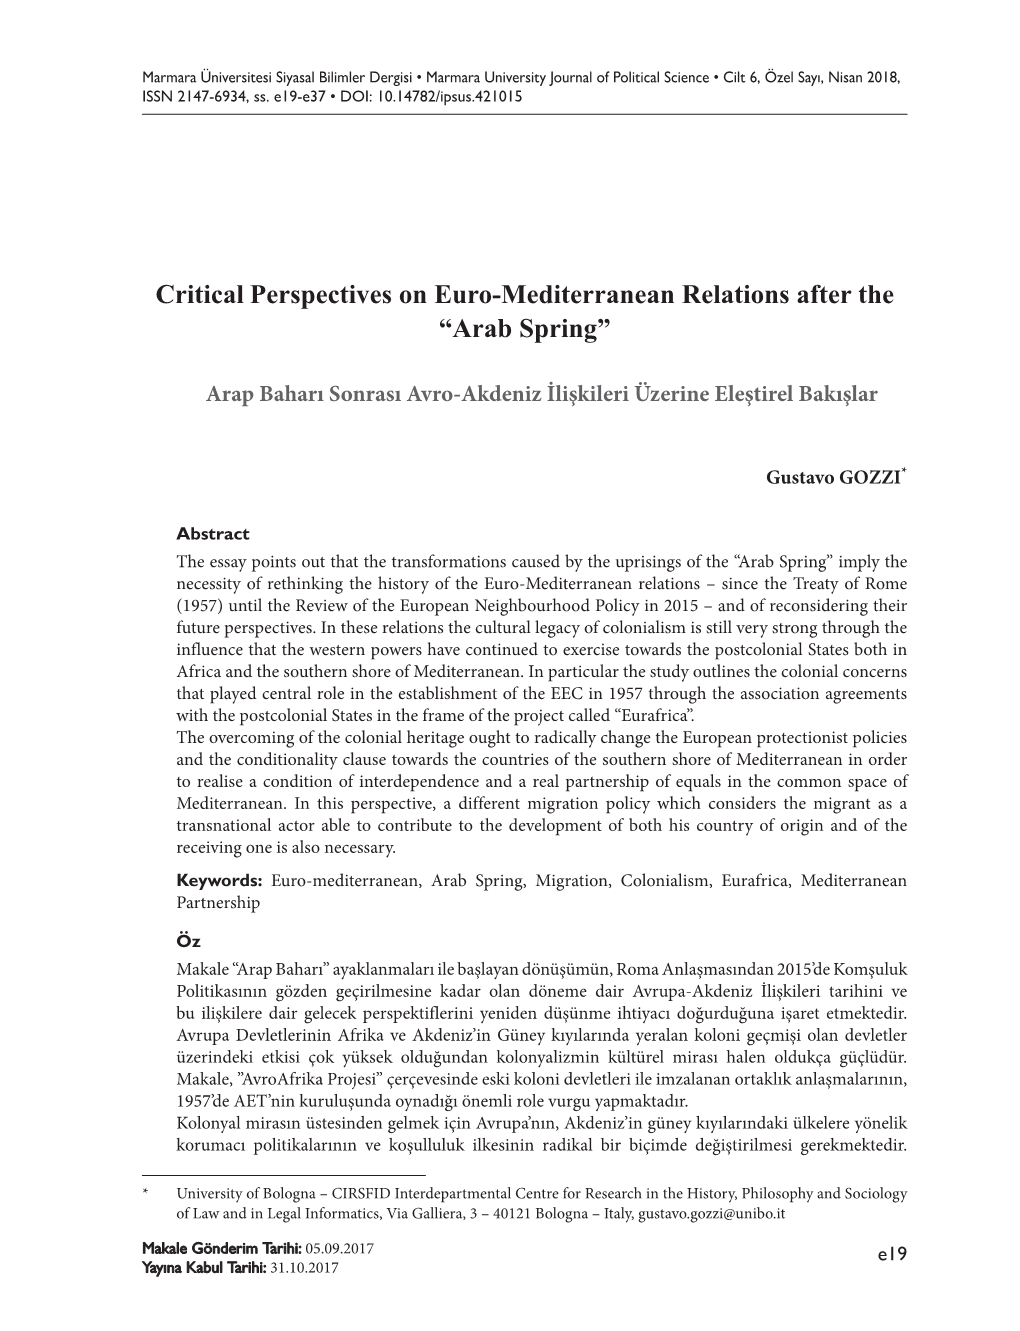 Critical Perspectives on Euro-Mediterranean Relations After the “Arab Spring”